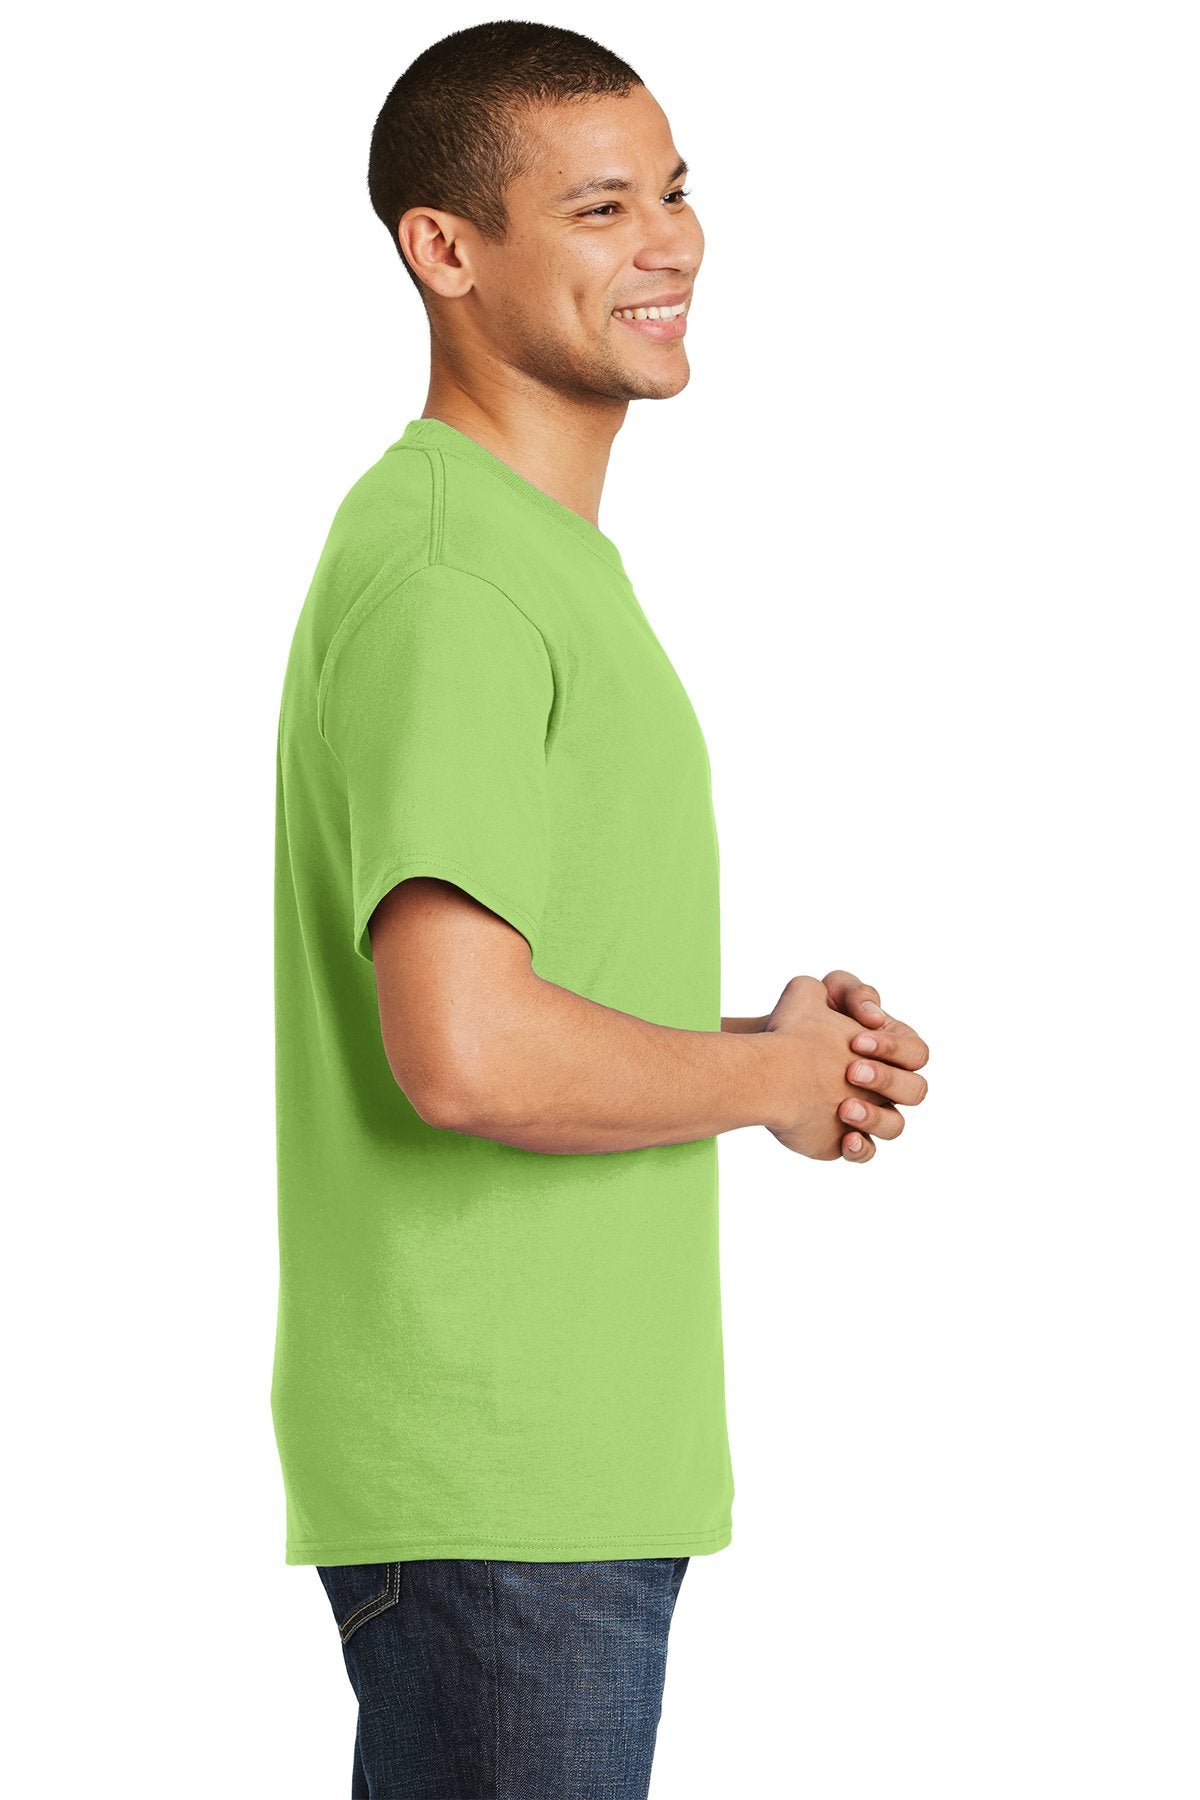 hanes beefy cotton t shirt 5180 lime